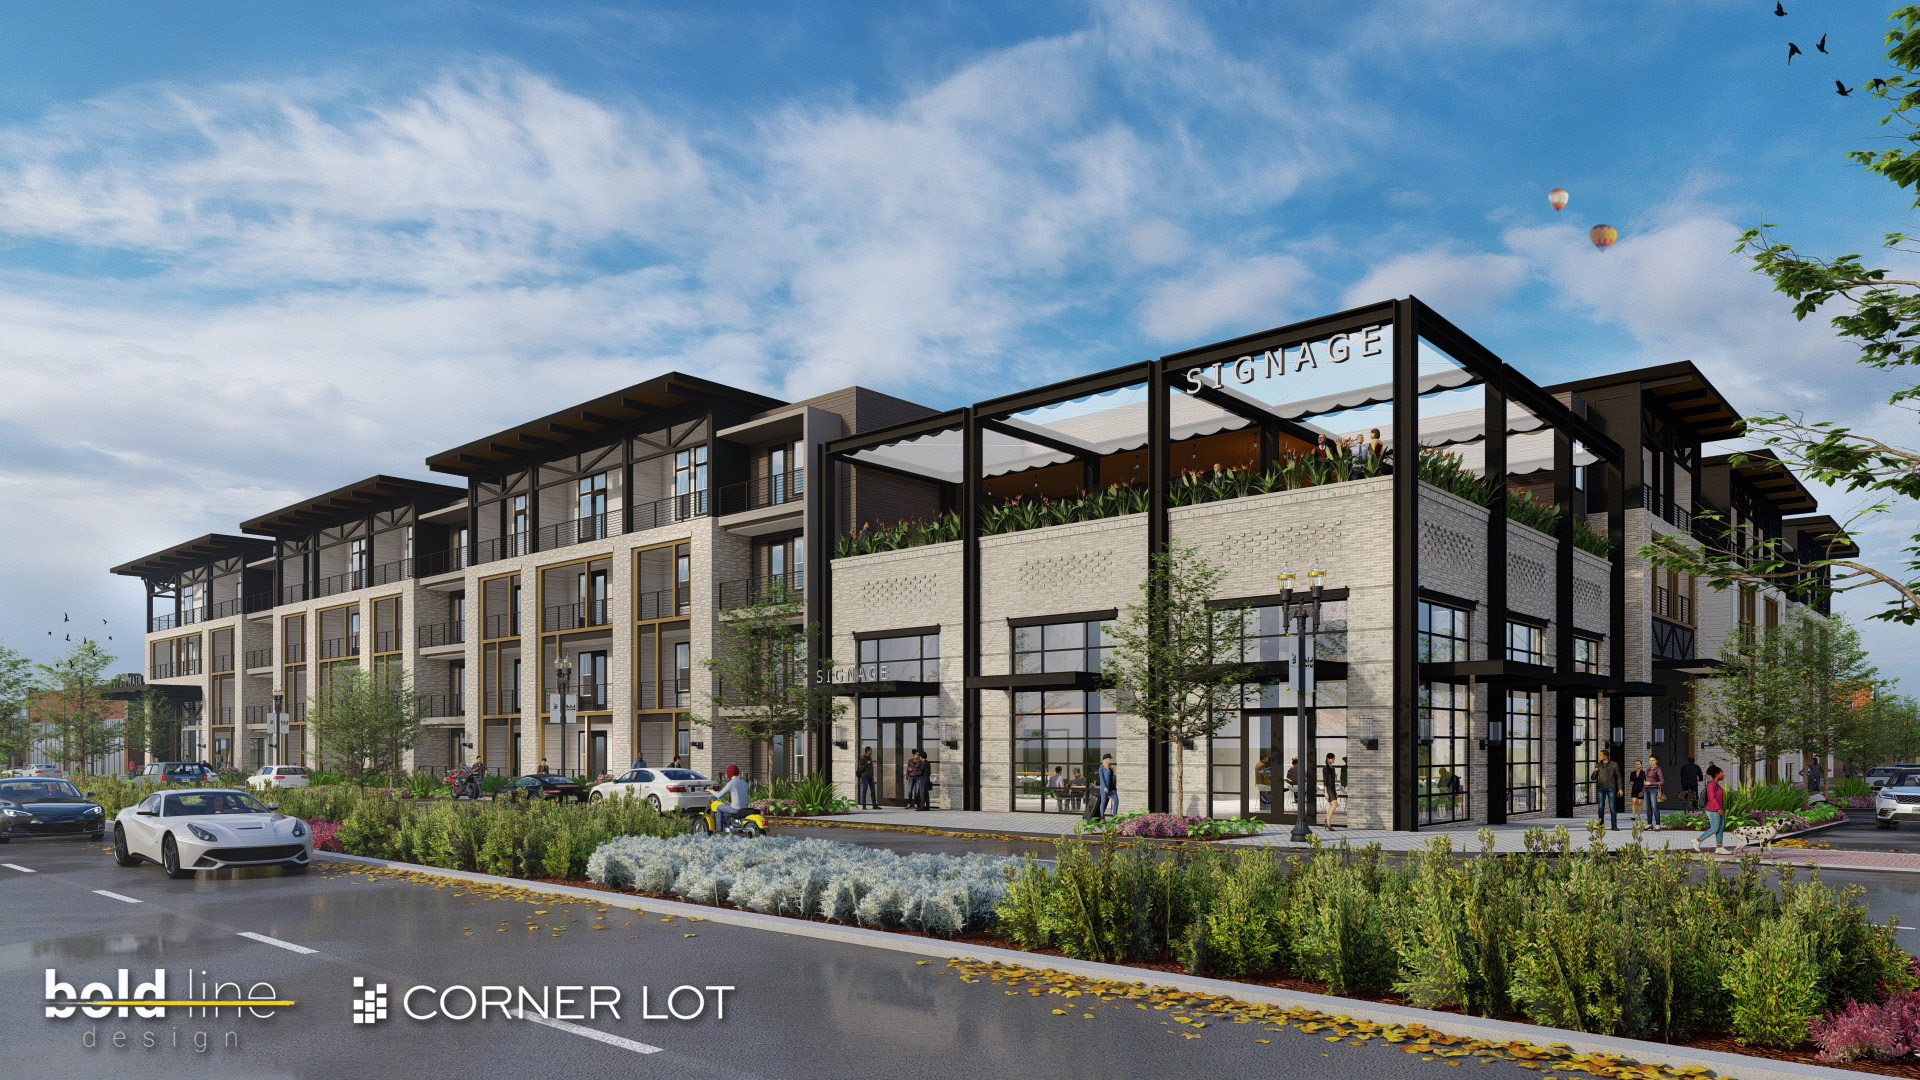 The 201-unit, four-story project will include retail uses. (Bold Line Design)